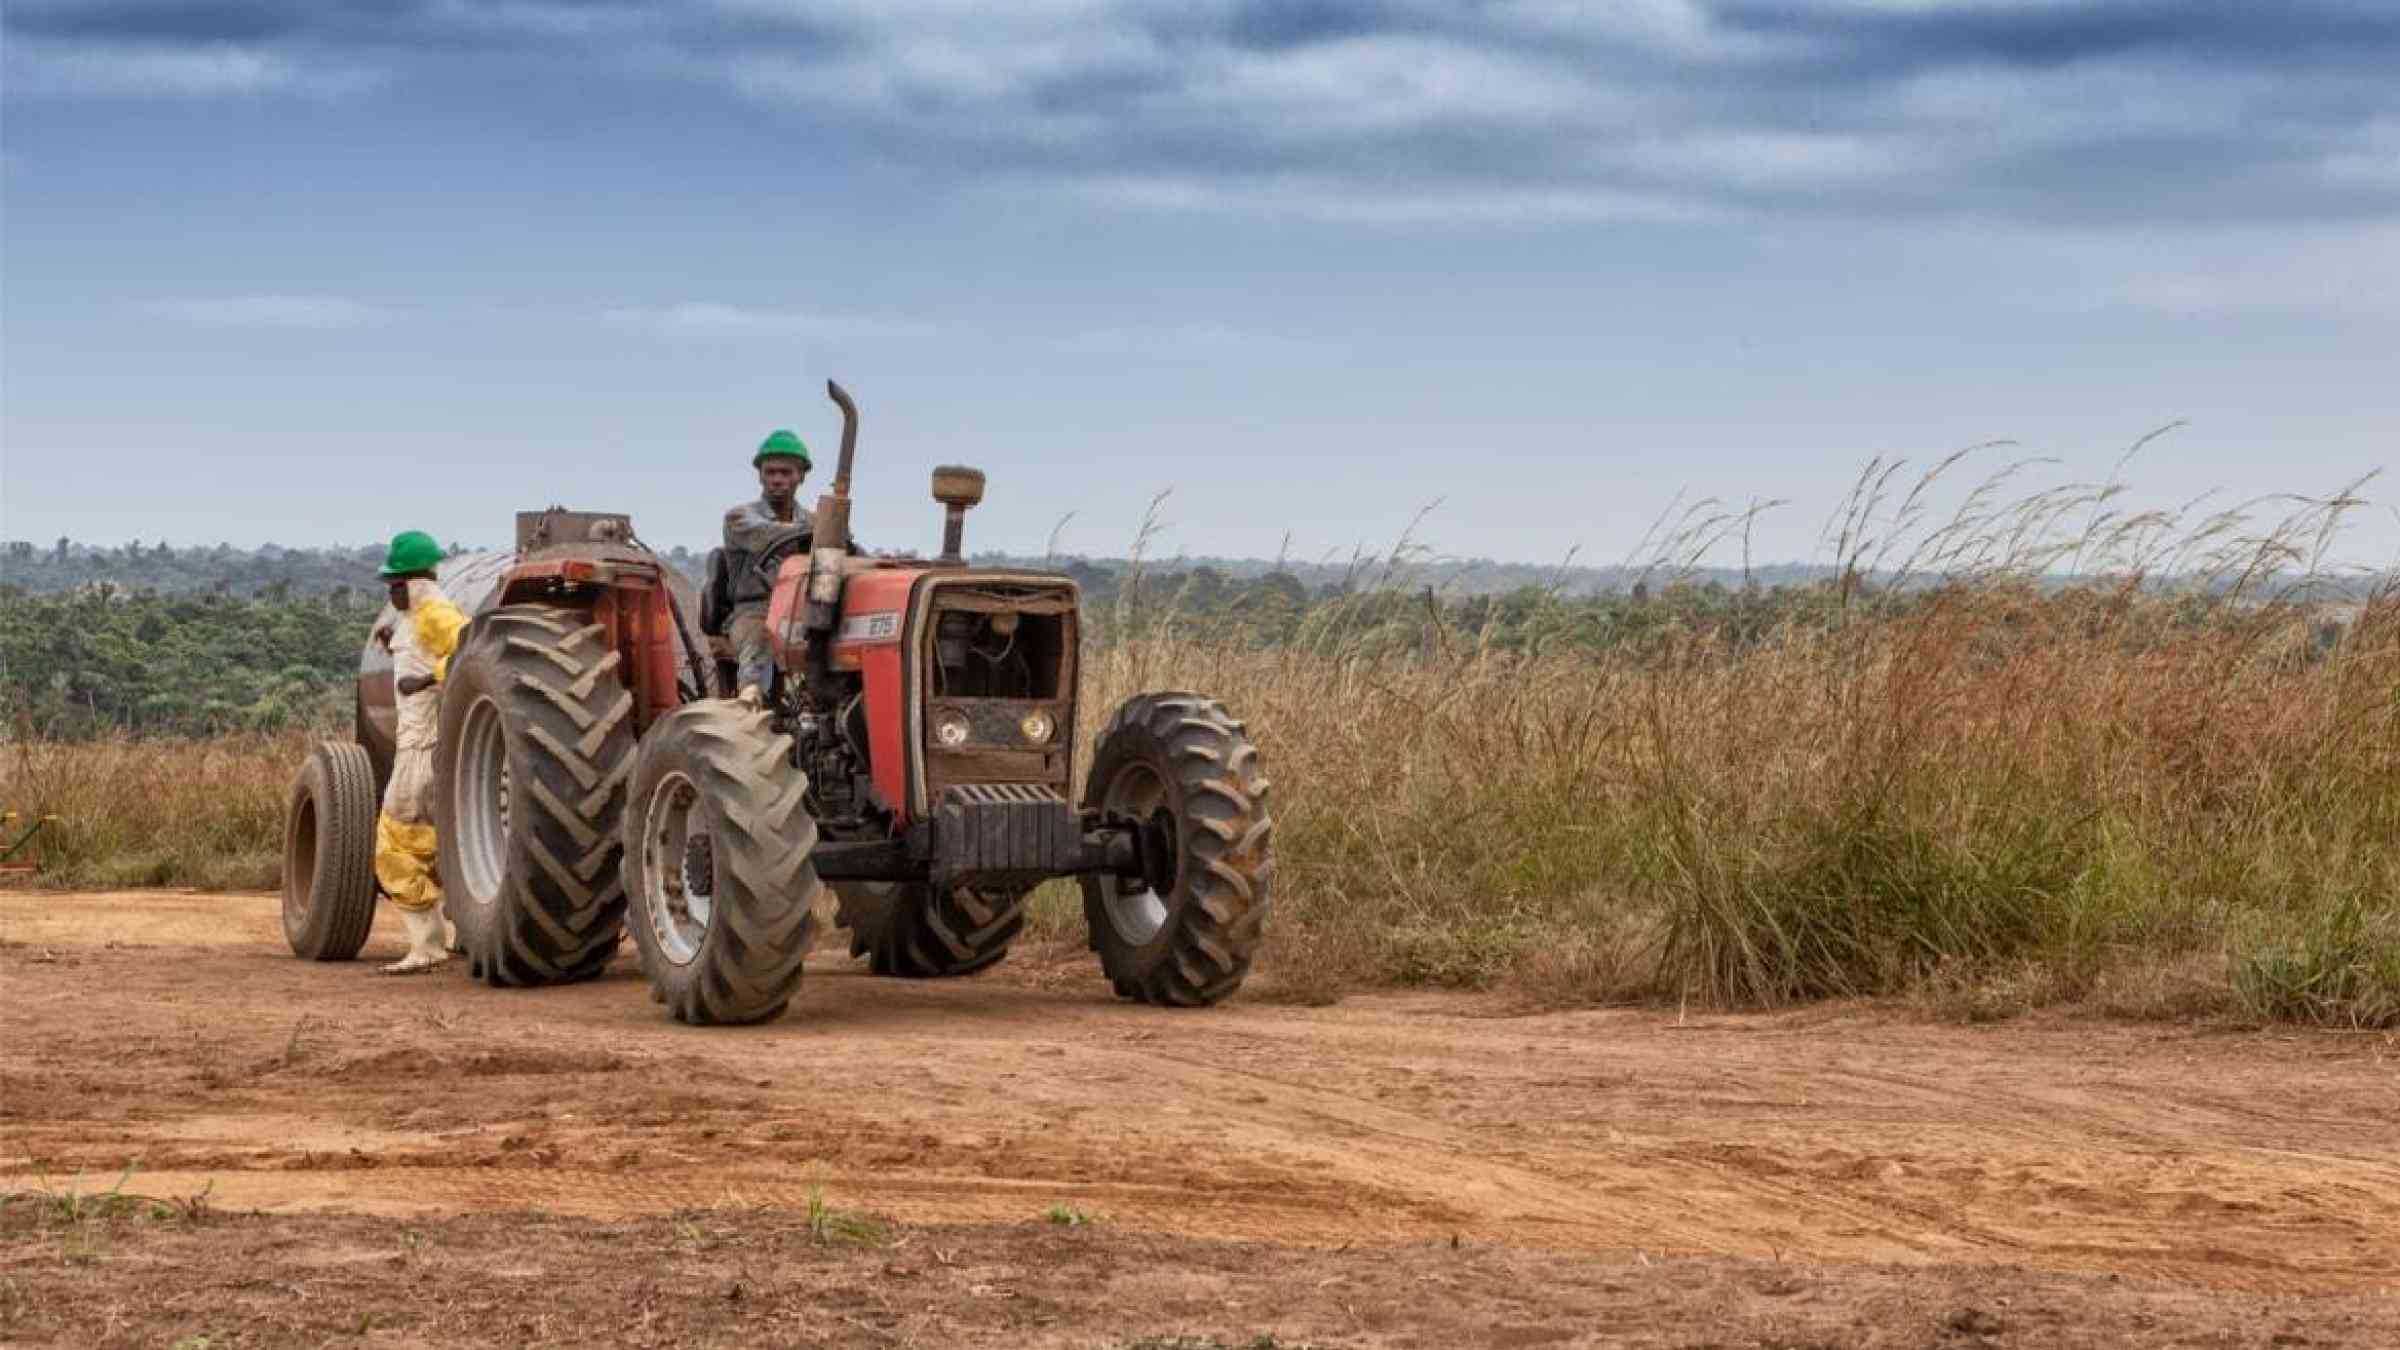 An farmer crosses his field on a tractor in Cabinda, Angola